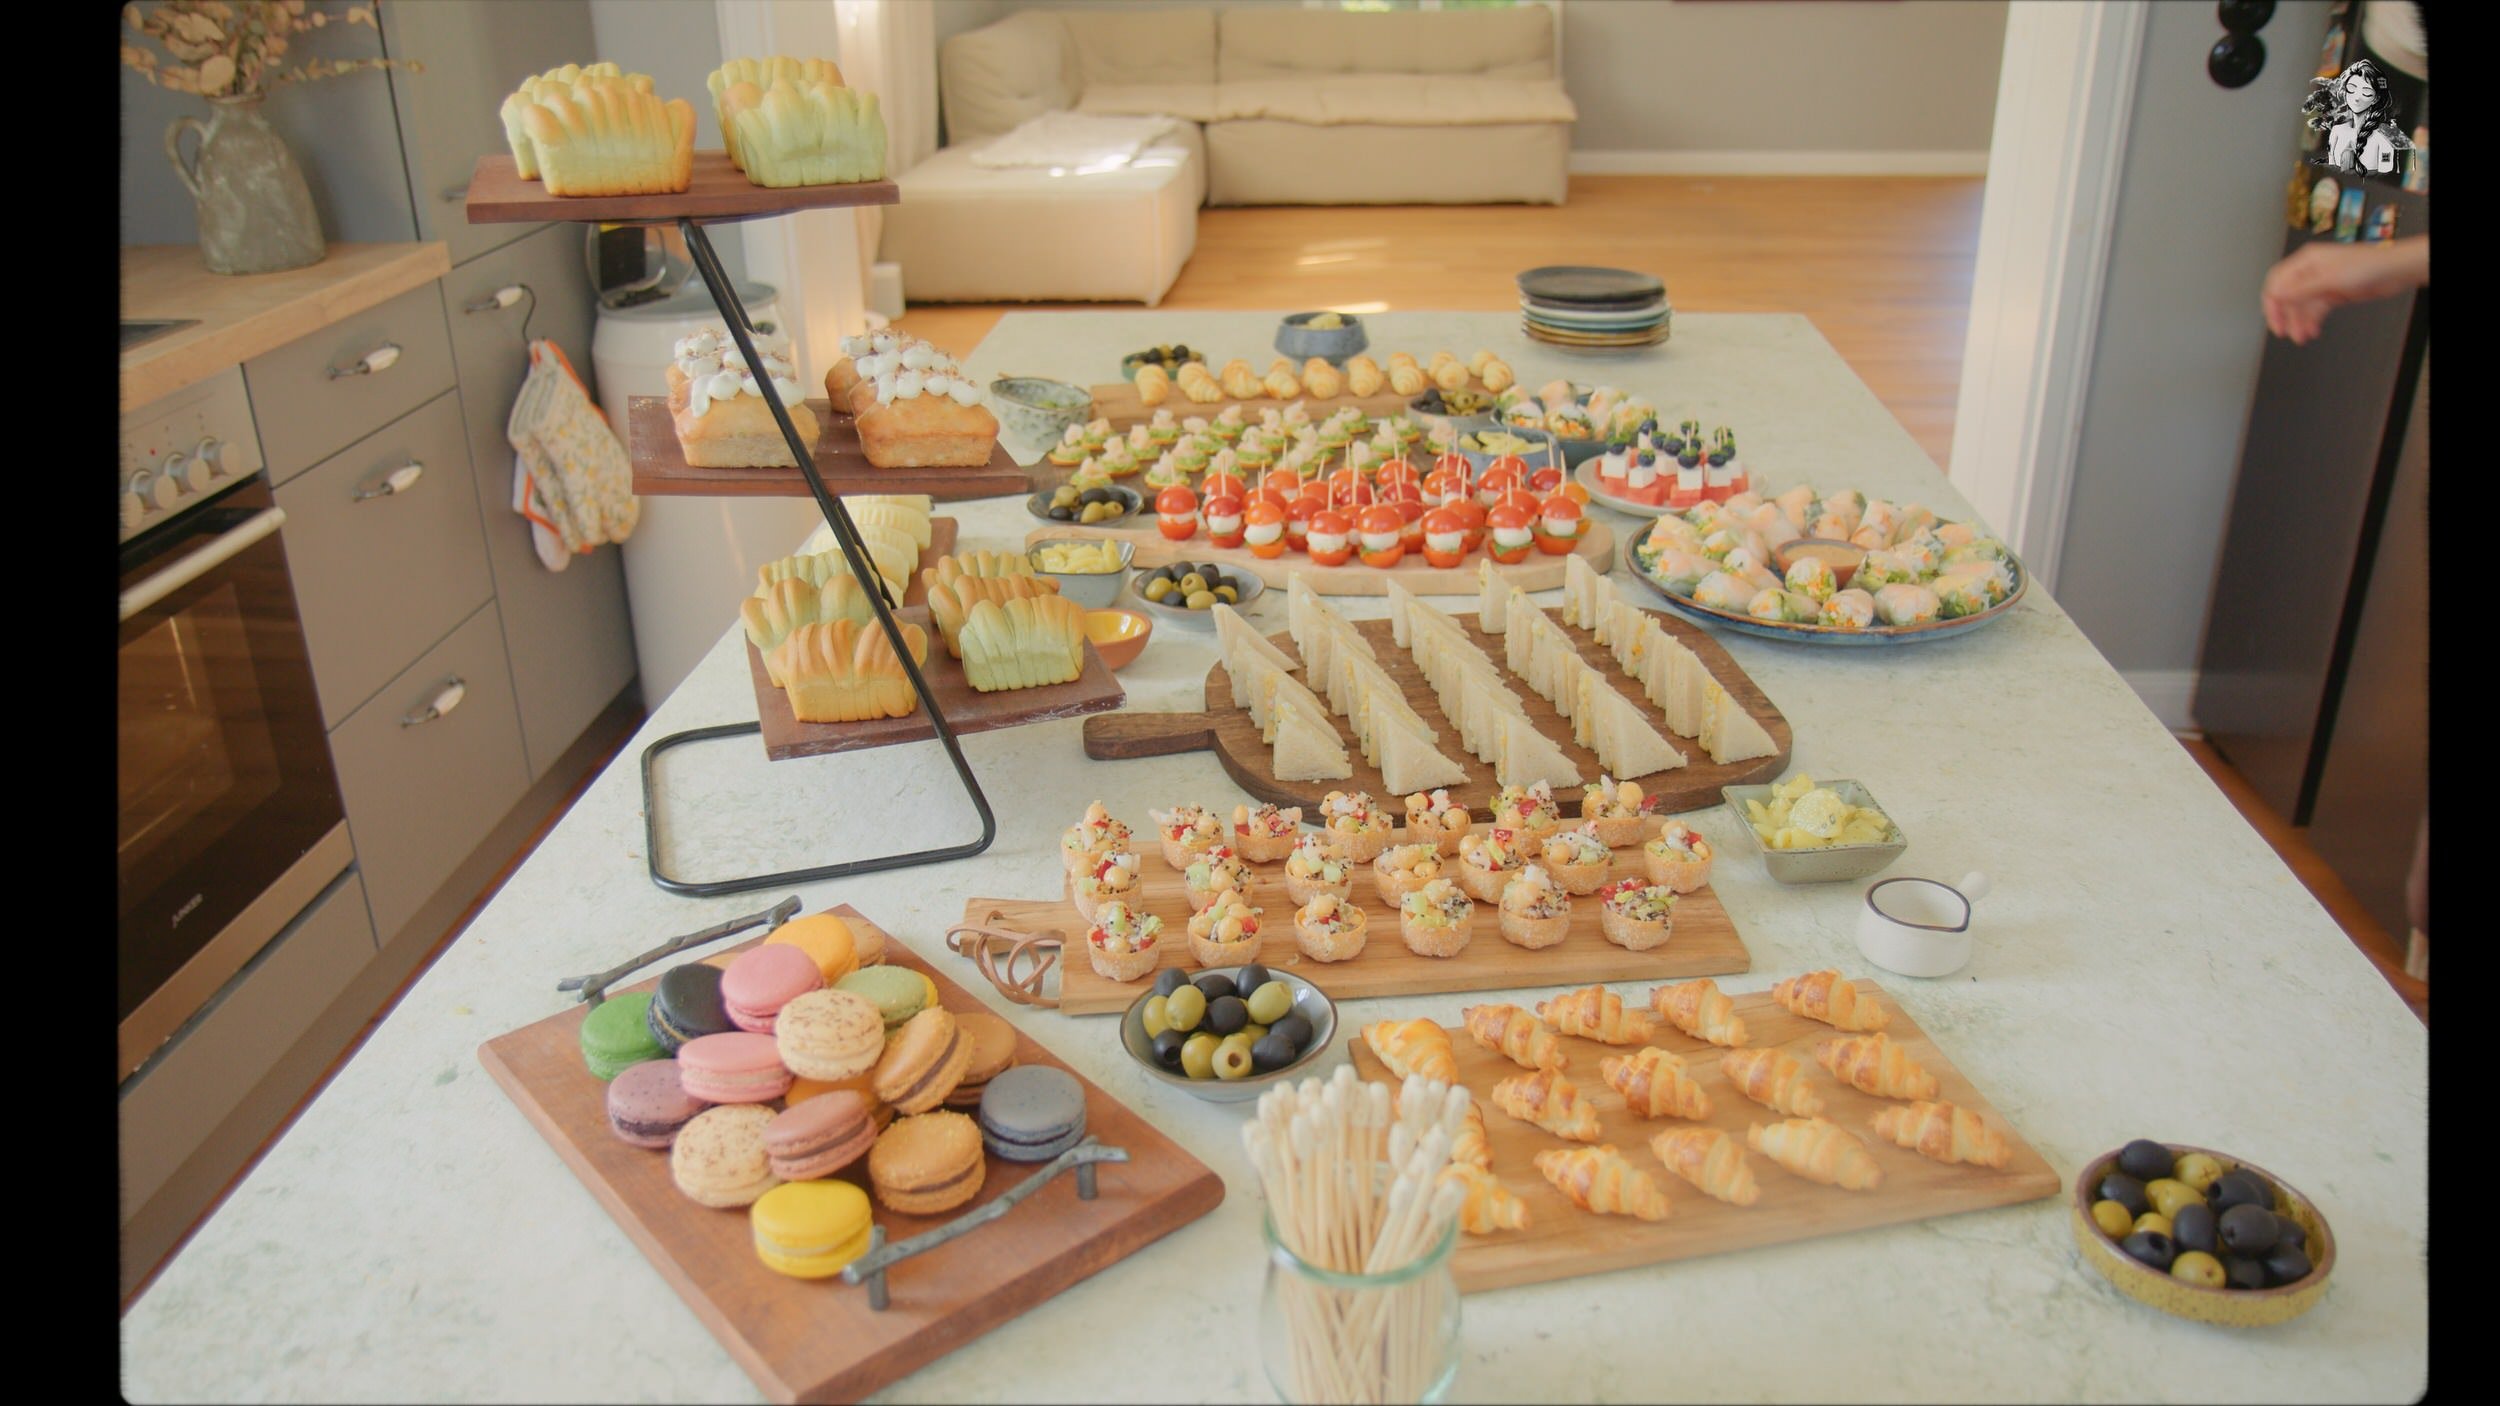 Small Bites Brunch Buffet Ideas for your next party - Her86m2 _1.251.1.jpg